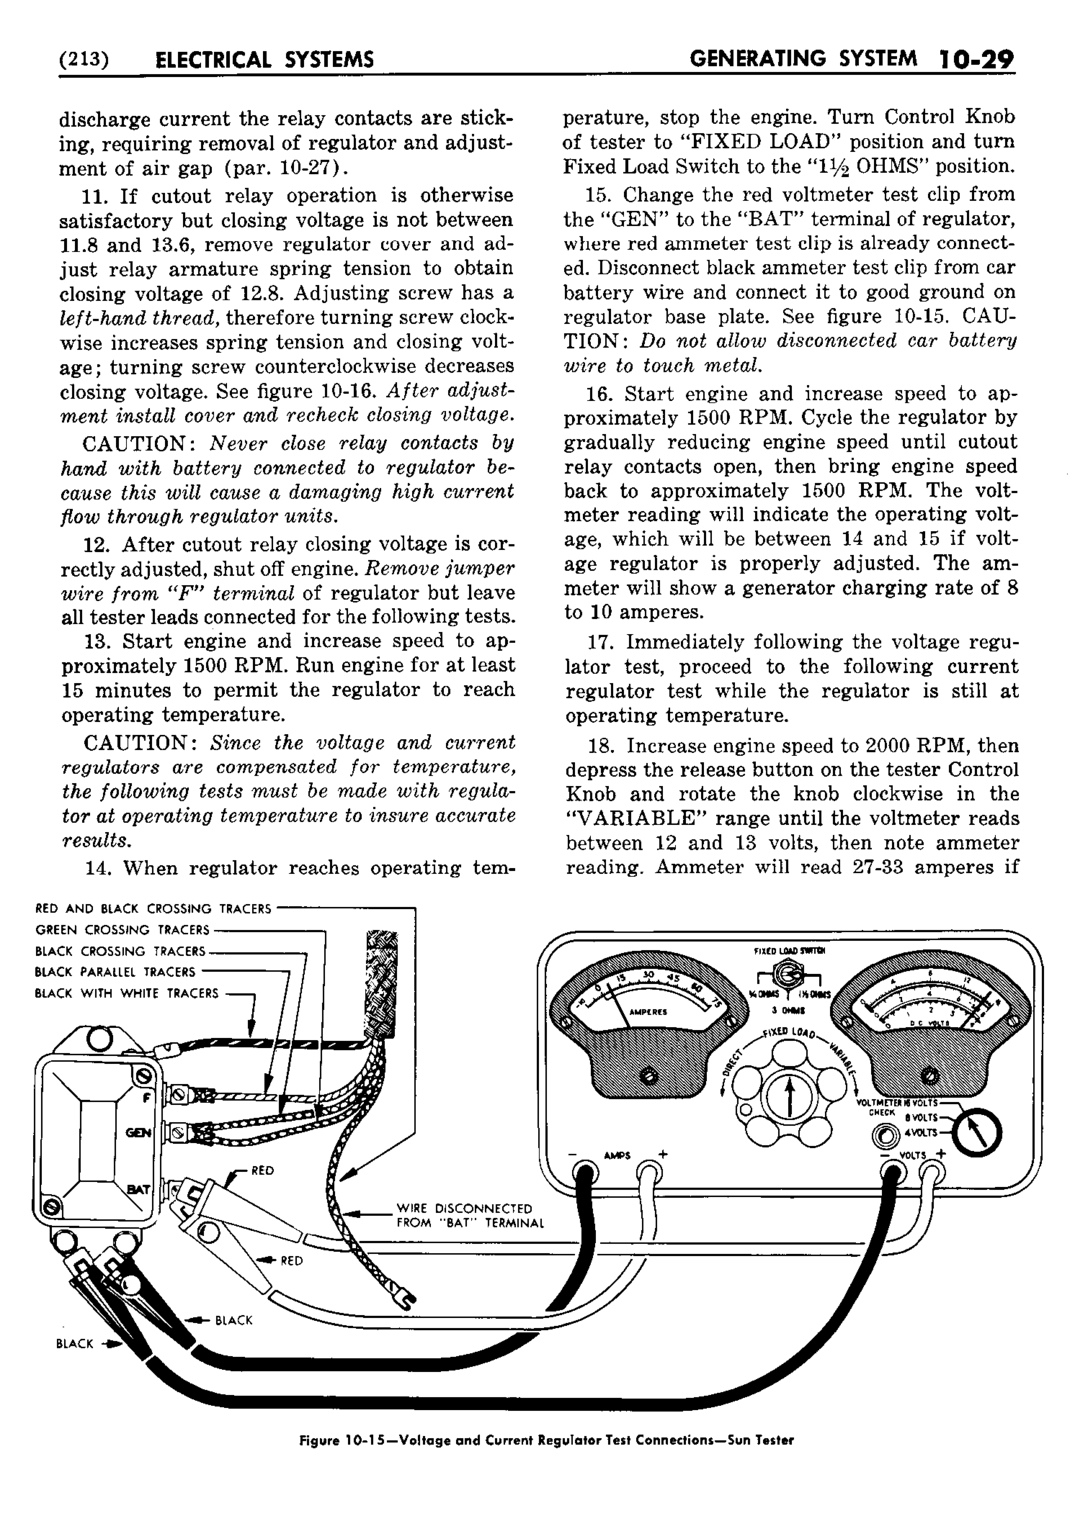 n_11 1953 Buick Shop Manual - Electrical Systems-029-029.jpg